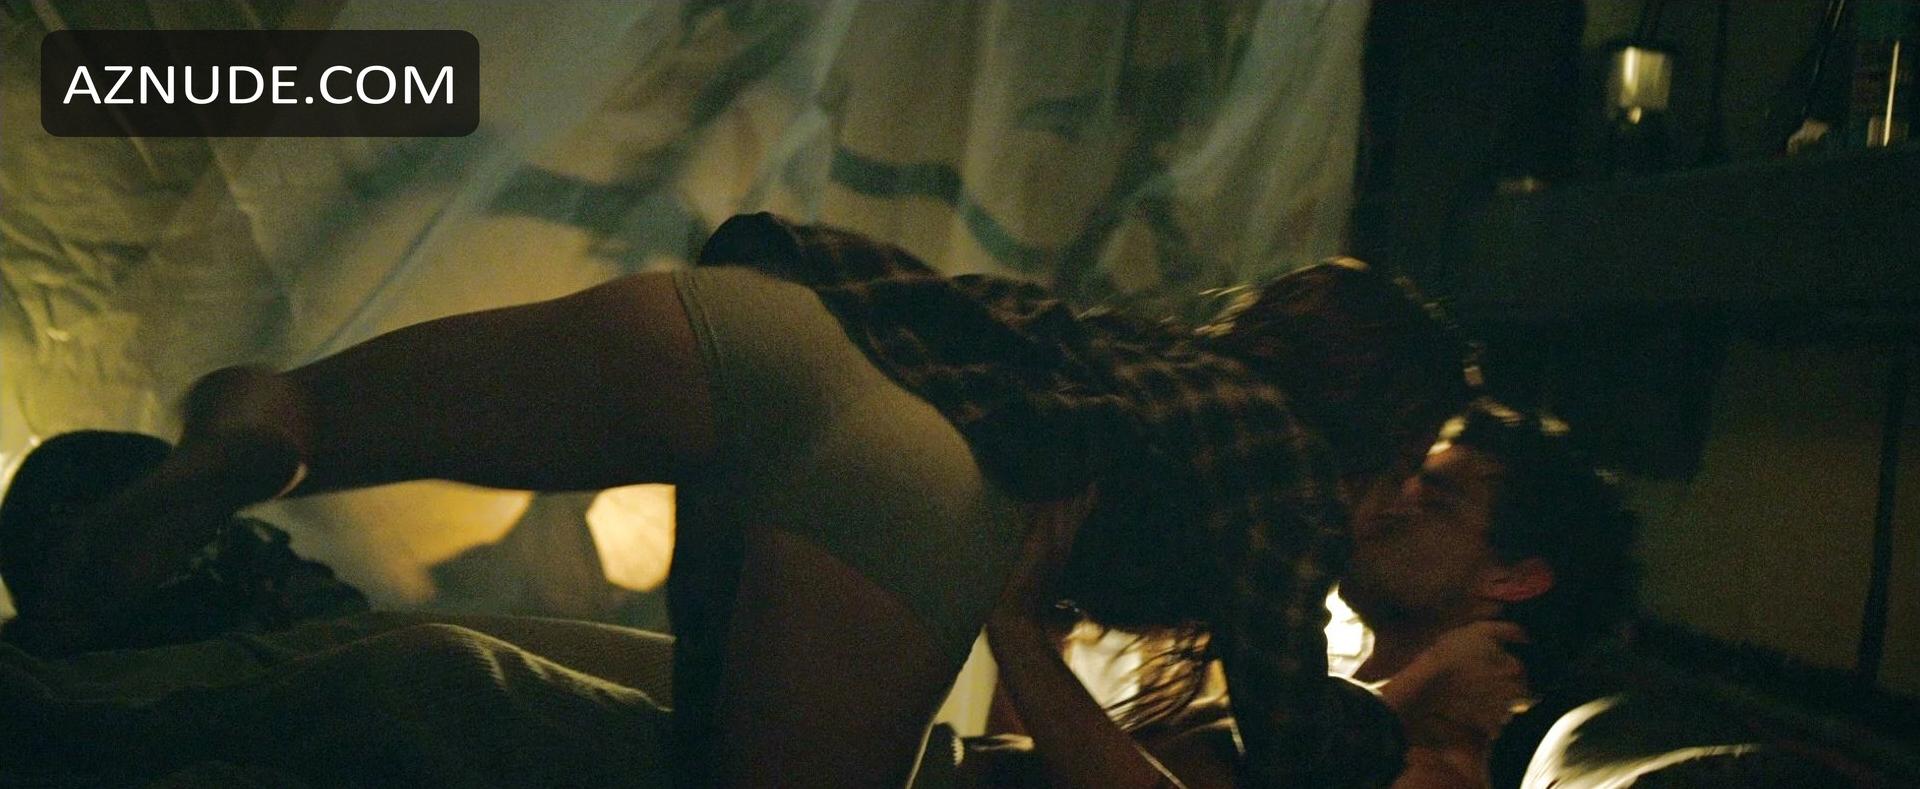 Marie avgeropoulos nue